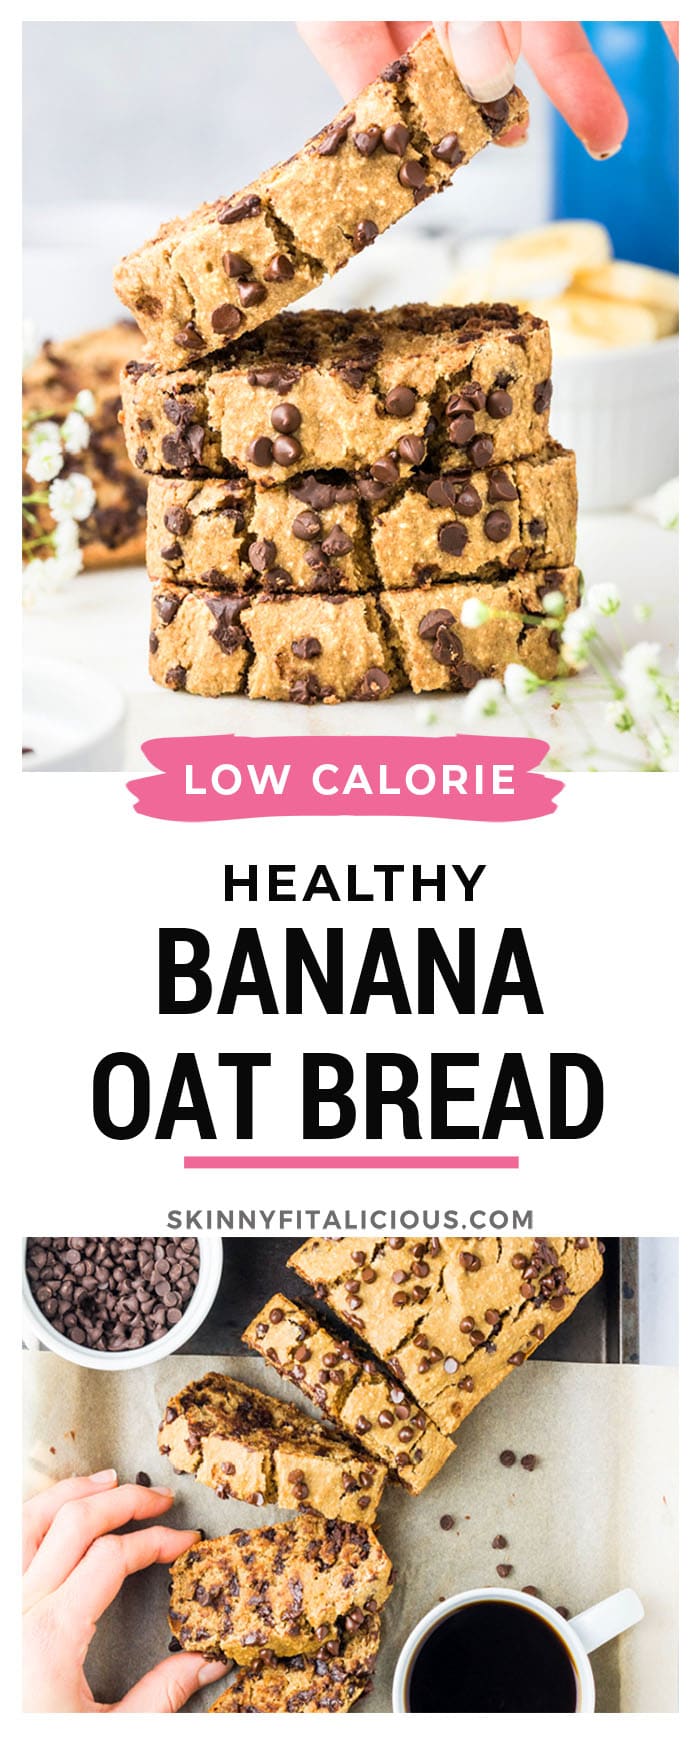 Healthy Chocolate Chip Banana Oat Bread made low calorie and lower sugar. A healthy gluten free banana bread made flourless with oats and dairy free. A lower calorie baked good that's better for you!